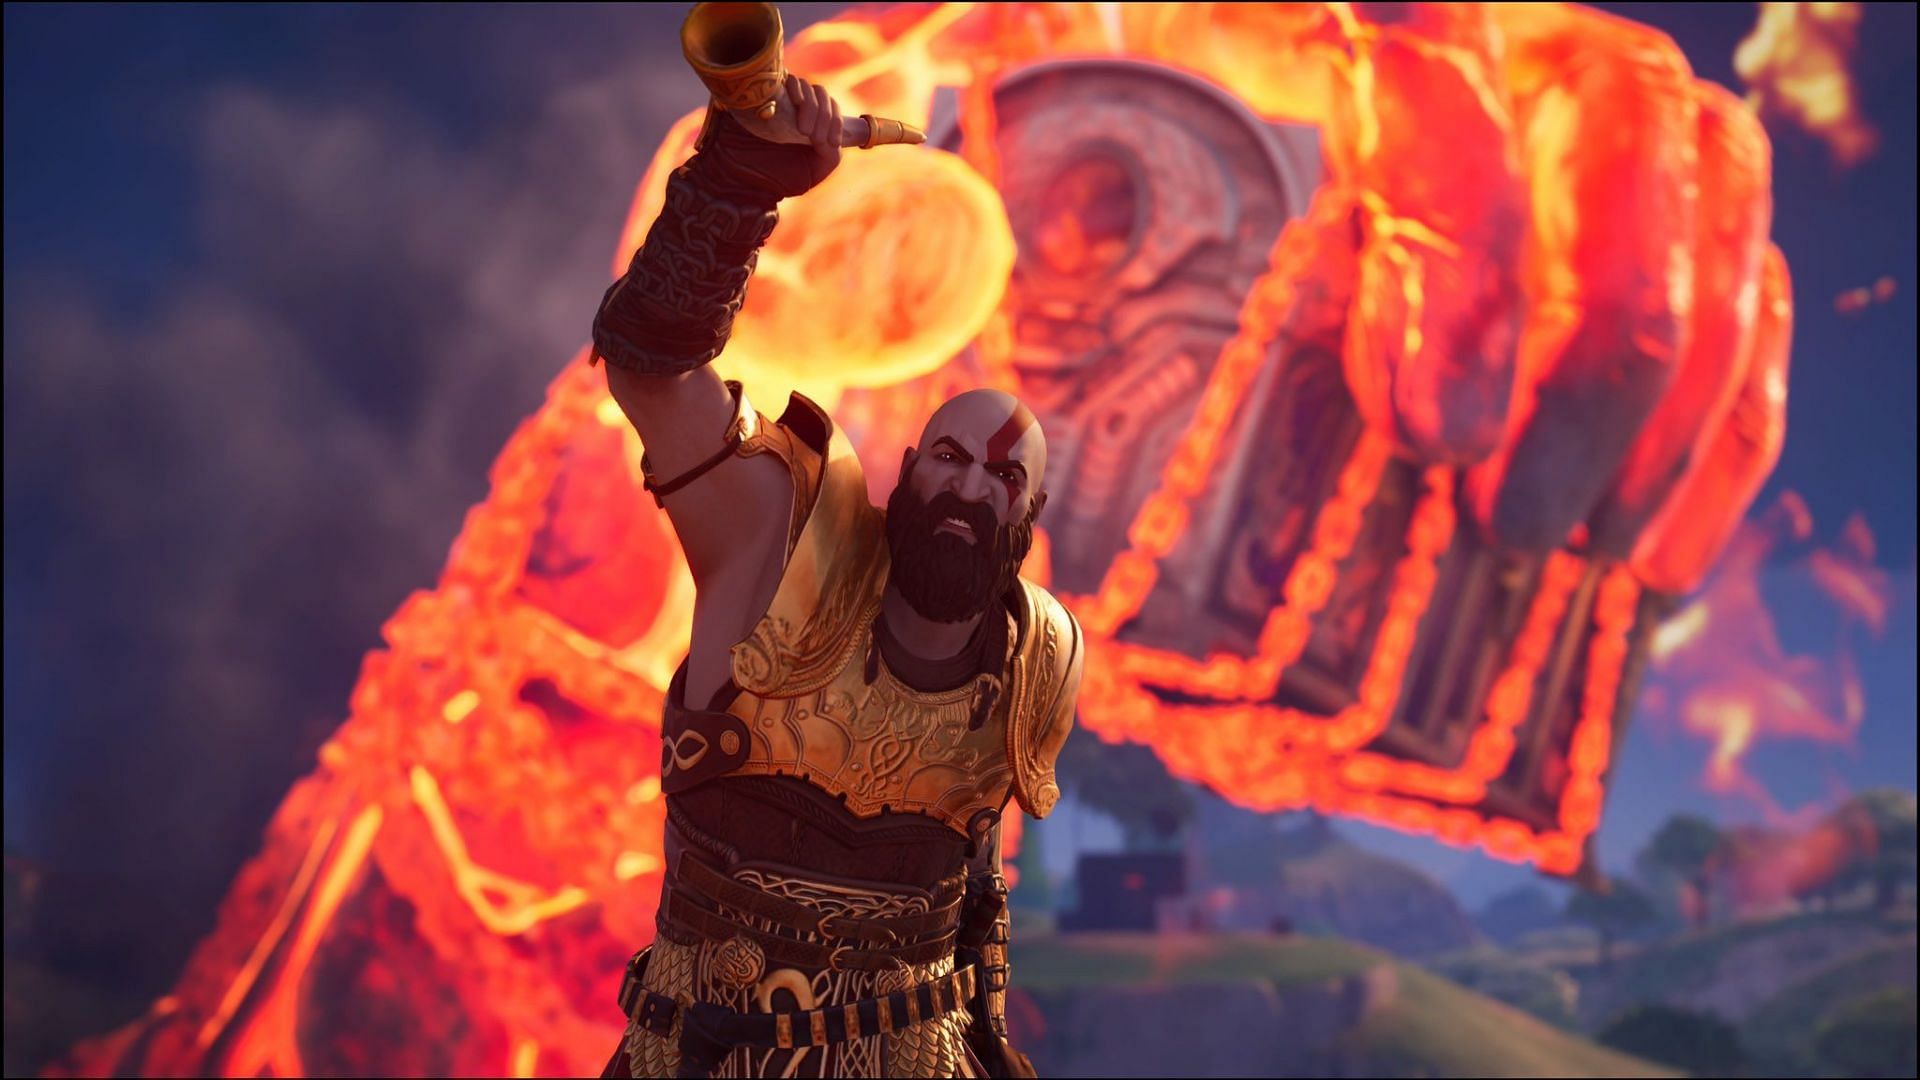 Fortnite Chapter 5 Season 2 leaks suggest Kratos Returning with Atreus, Zeus Mythic, flying ability, and more (Image via X/GoldenTheCube)